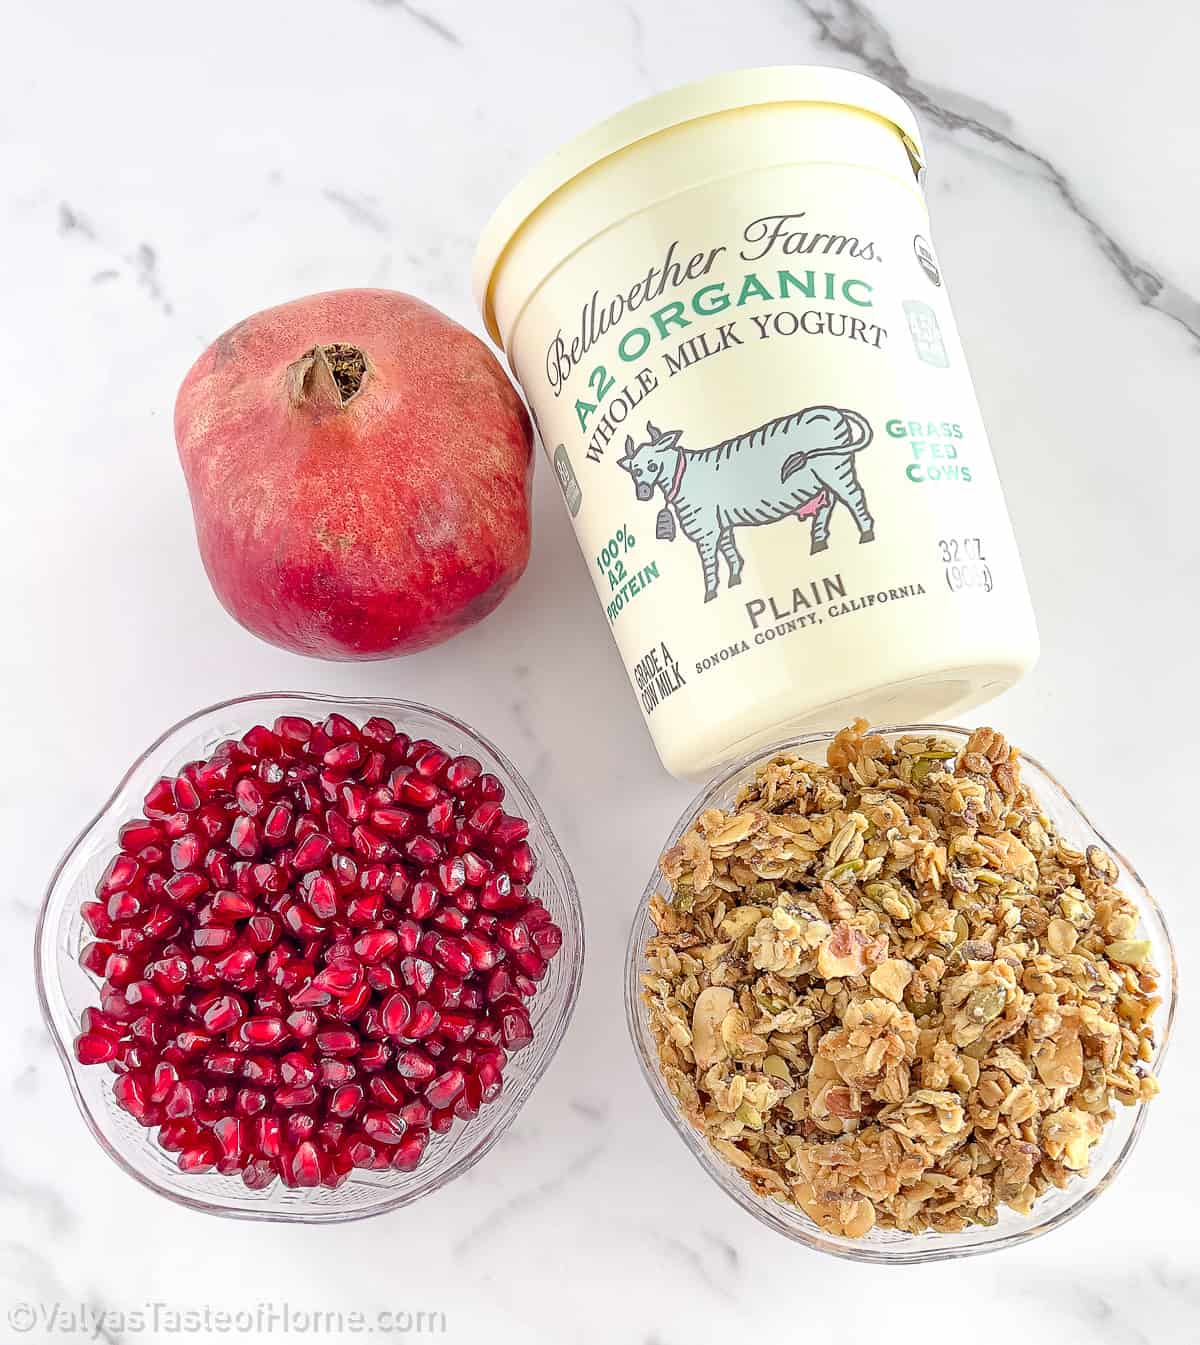 All you need are some simple pantry staple ingredients to make this pomegranate parfait recipe at home.